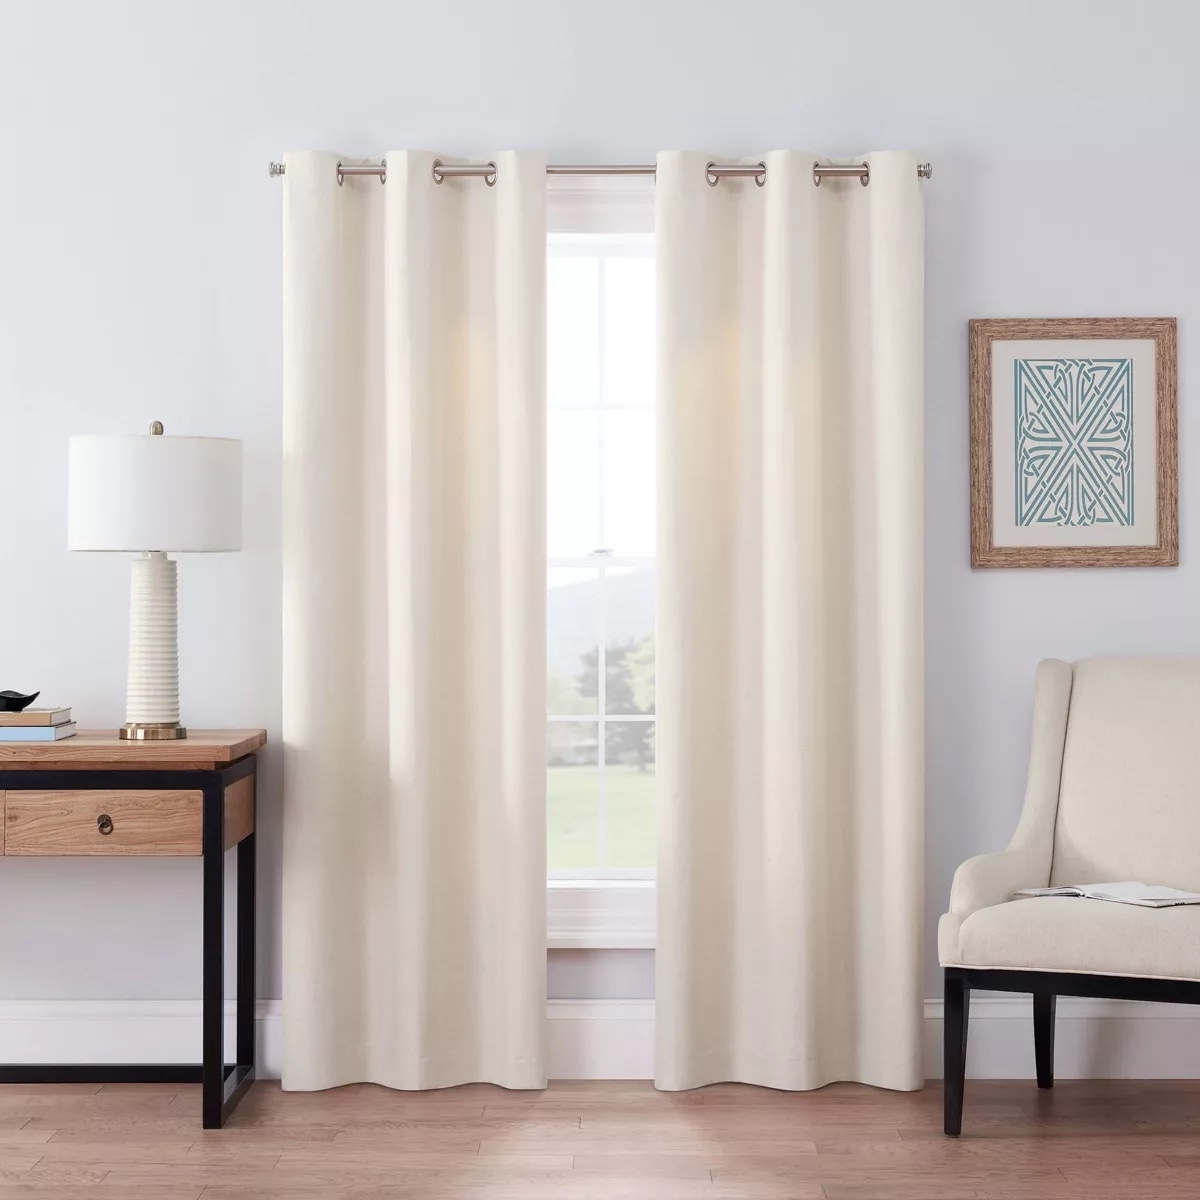 Cream-colored curtains hanging on a rod beside a beige armchair and a wooden side table with a lamp